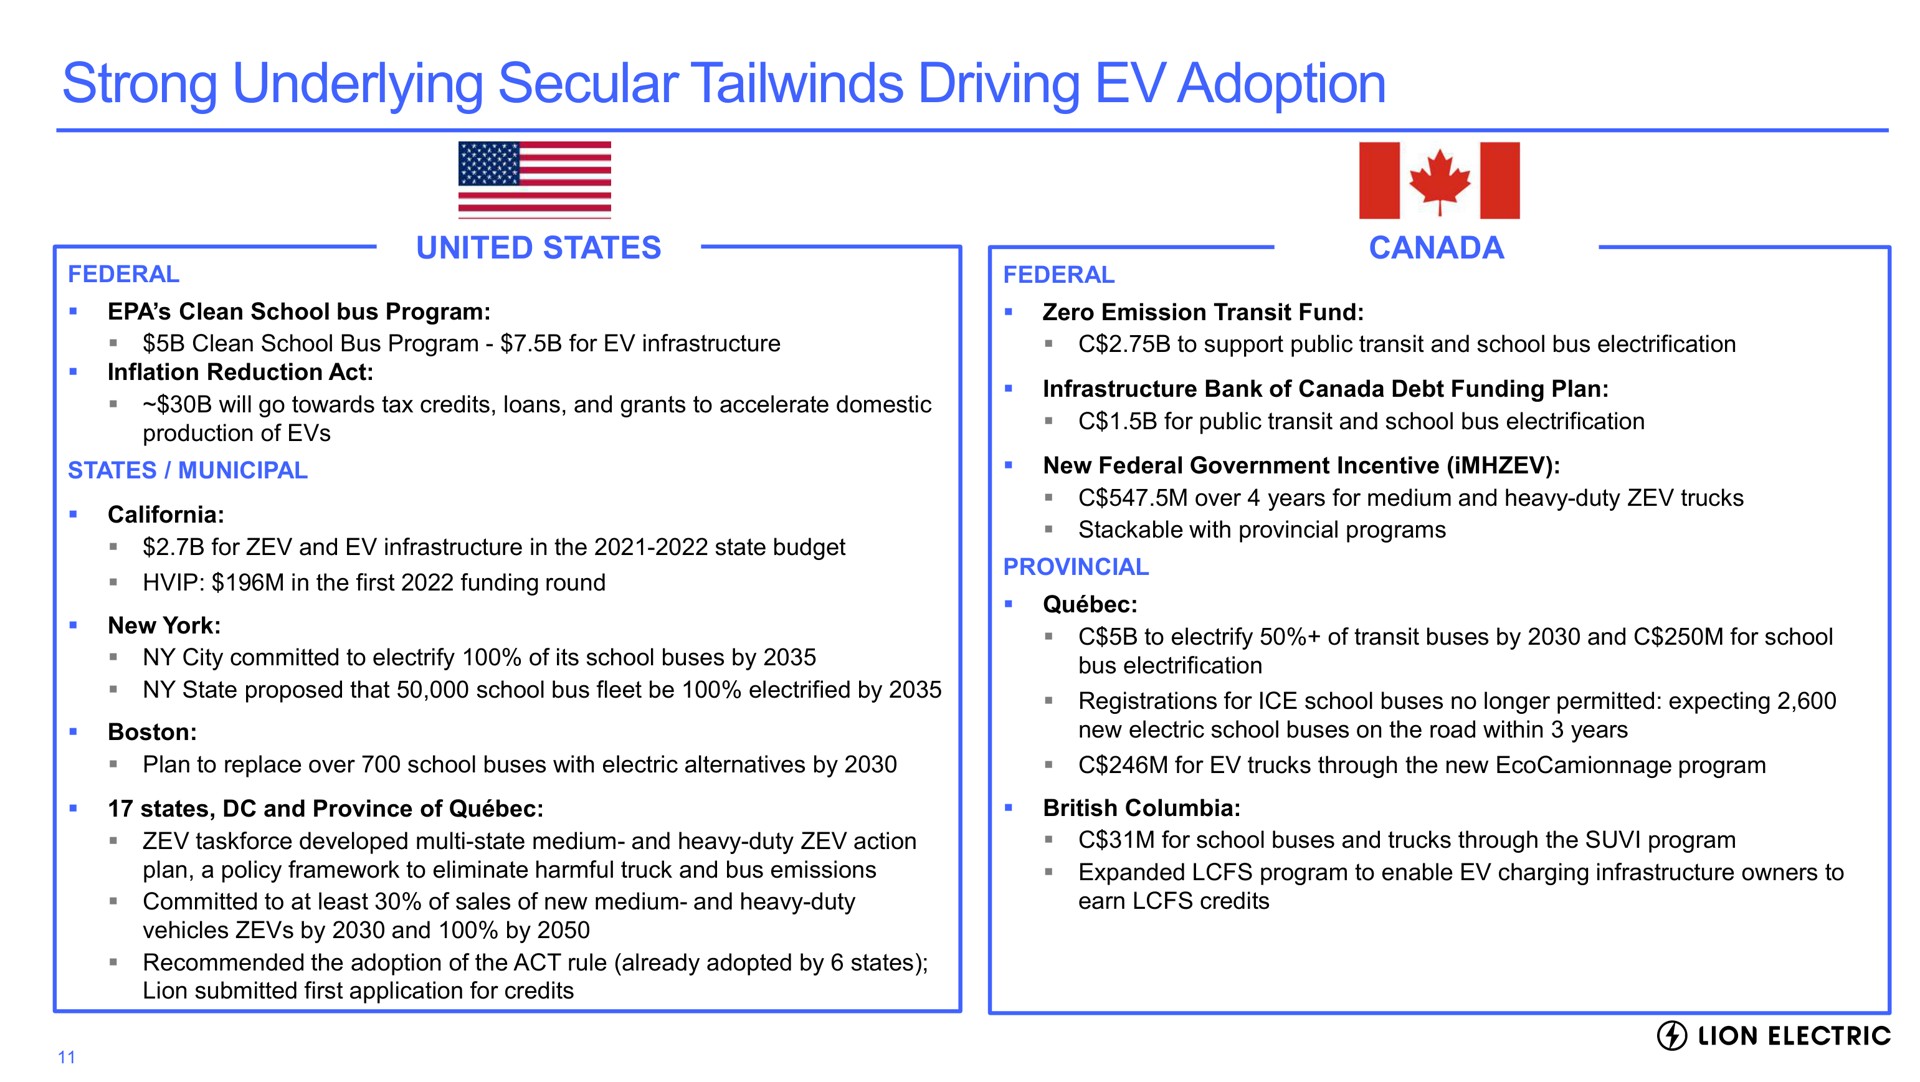 strong underlying secular driving adoption united states canada lion electric | Lion Electric